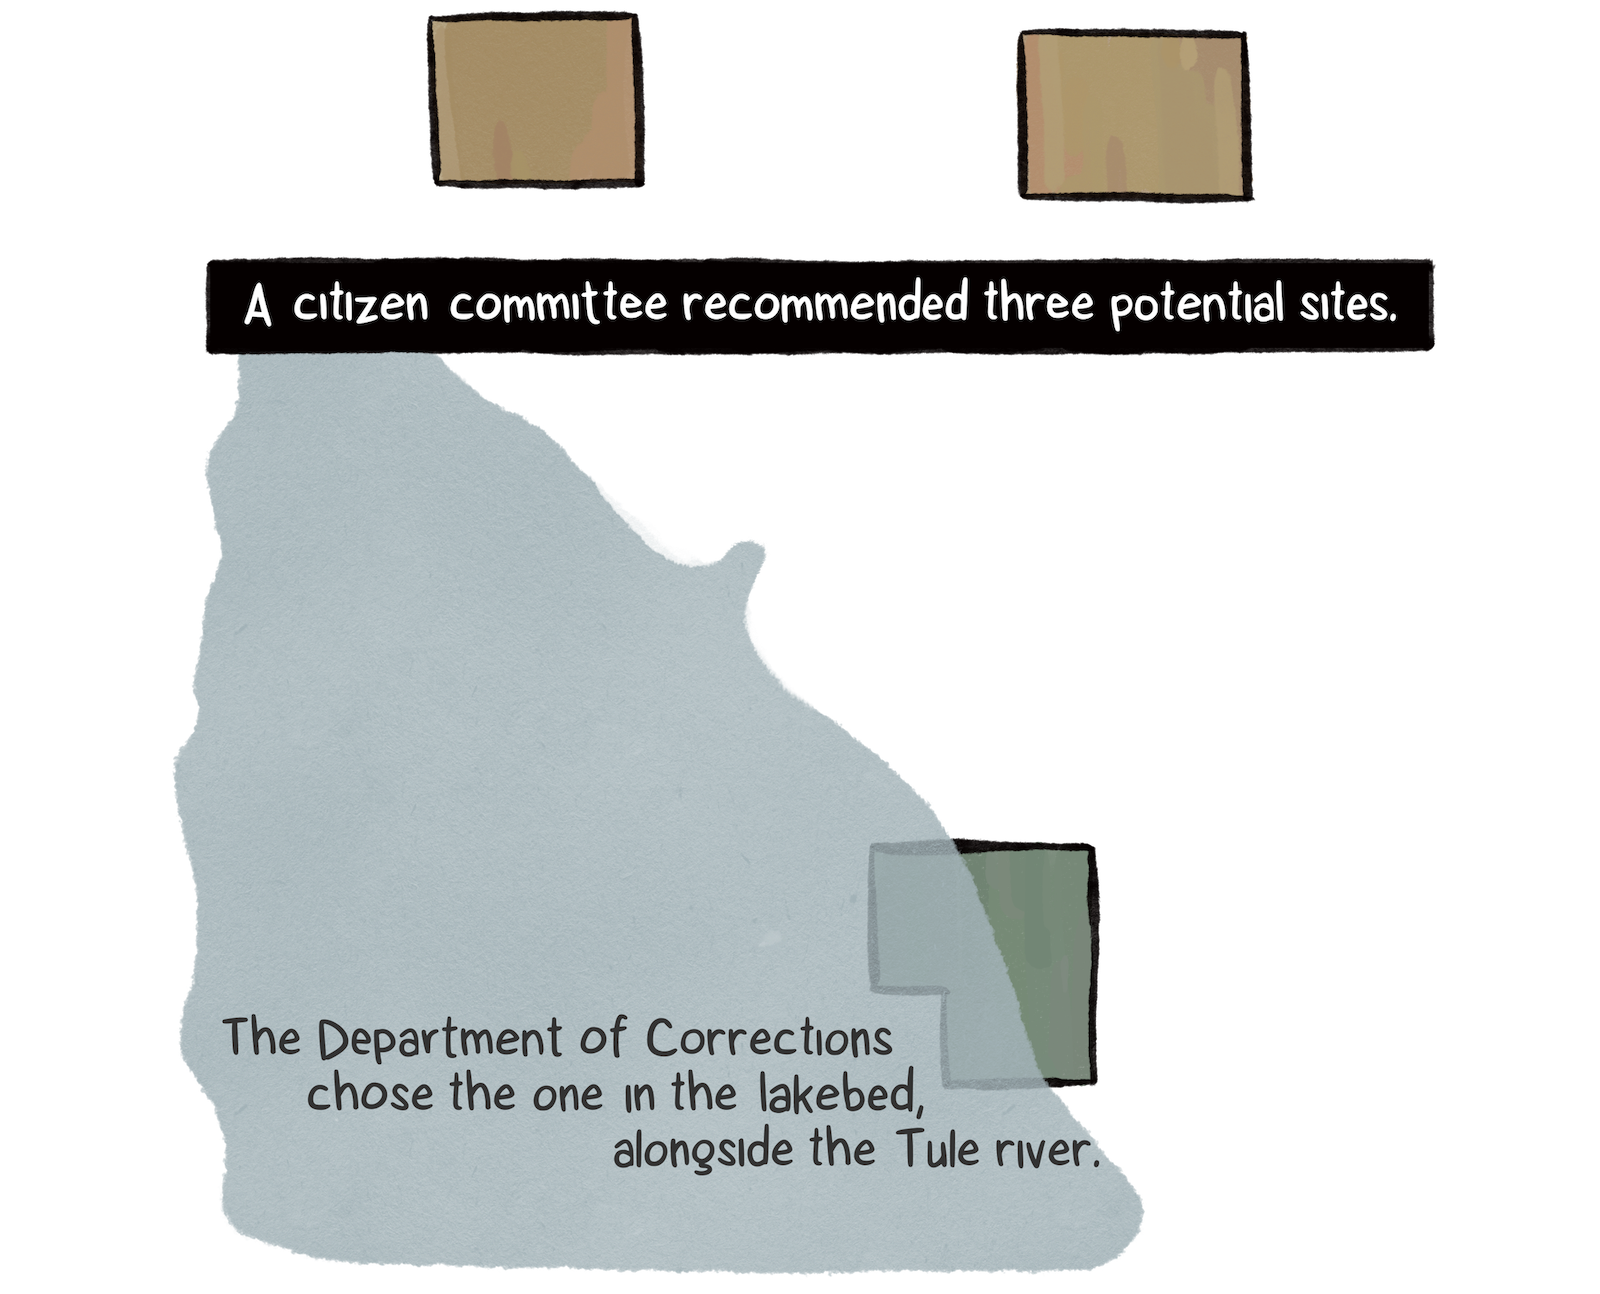 A citizen committee recommended three potential sites. The Department of Corrections chose the one in the lakebed alongside the Tule River. An image shows two sites outside the floodplain and one within it.